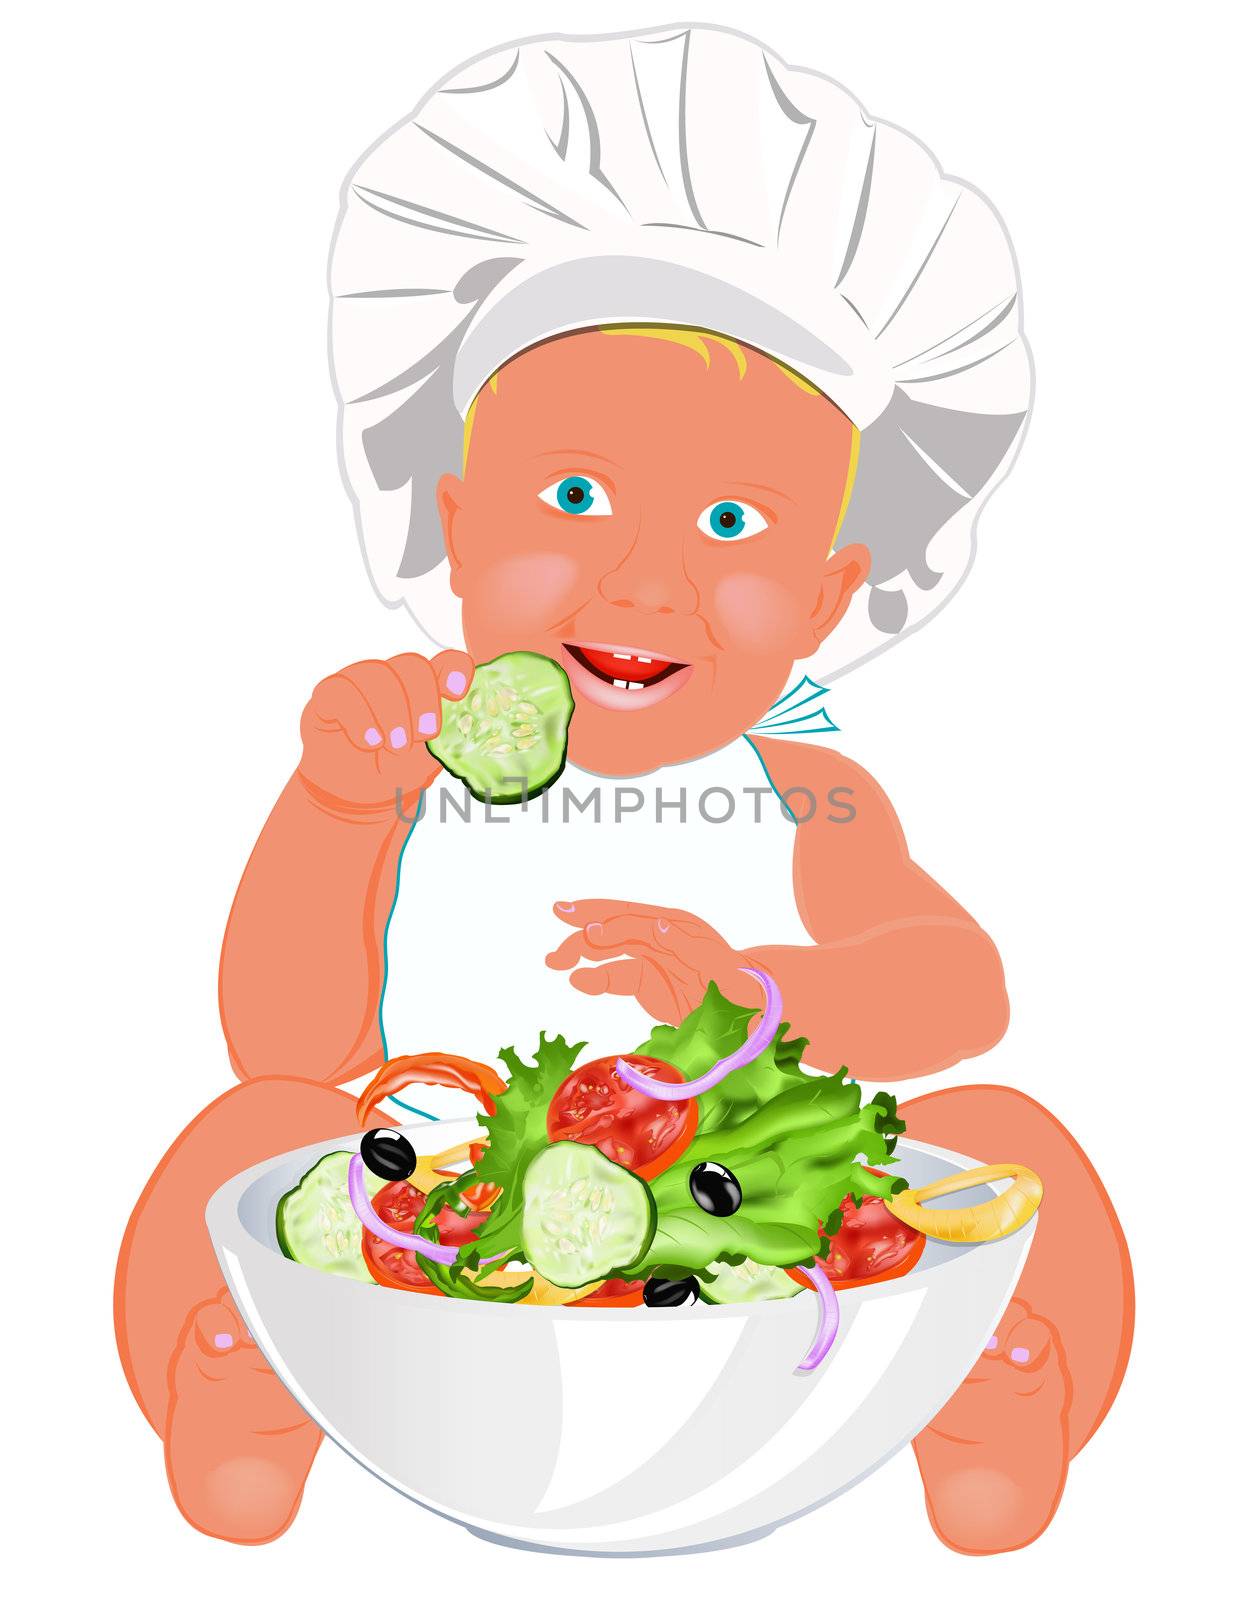 Chef Child and fresh vegetable salad on a white background by sergey150770SV